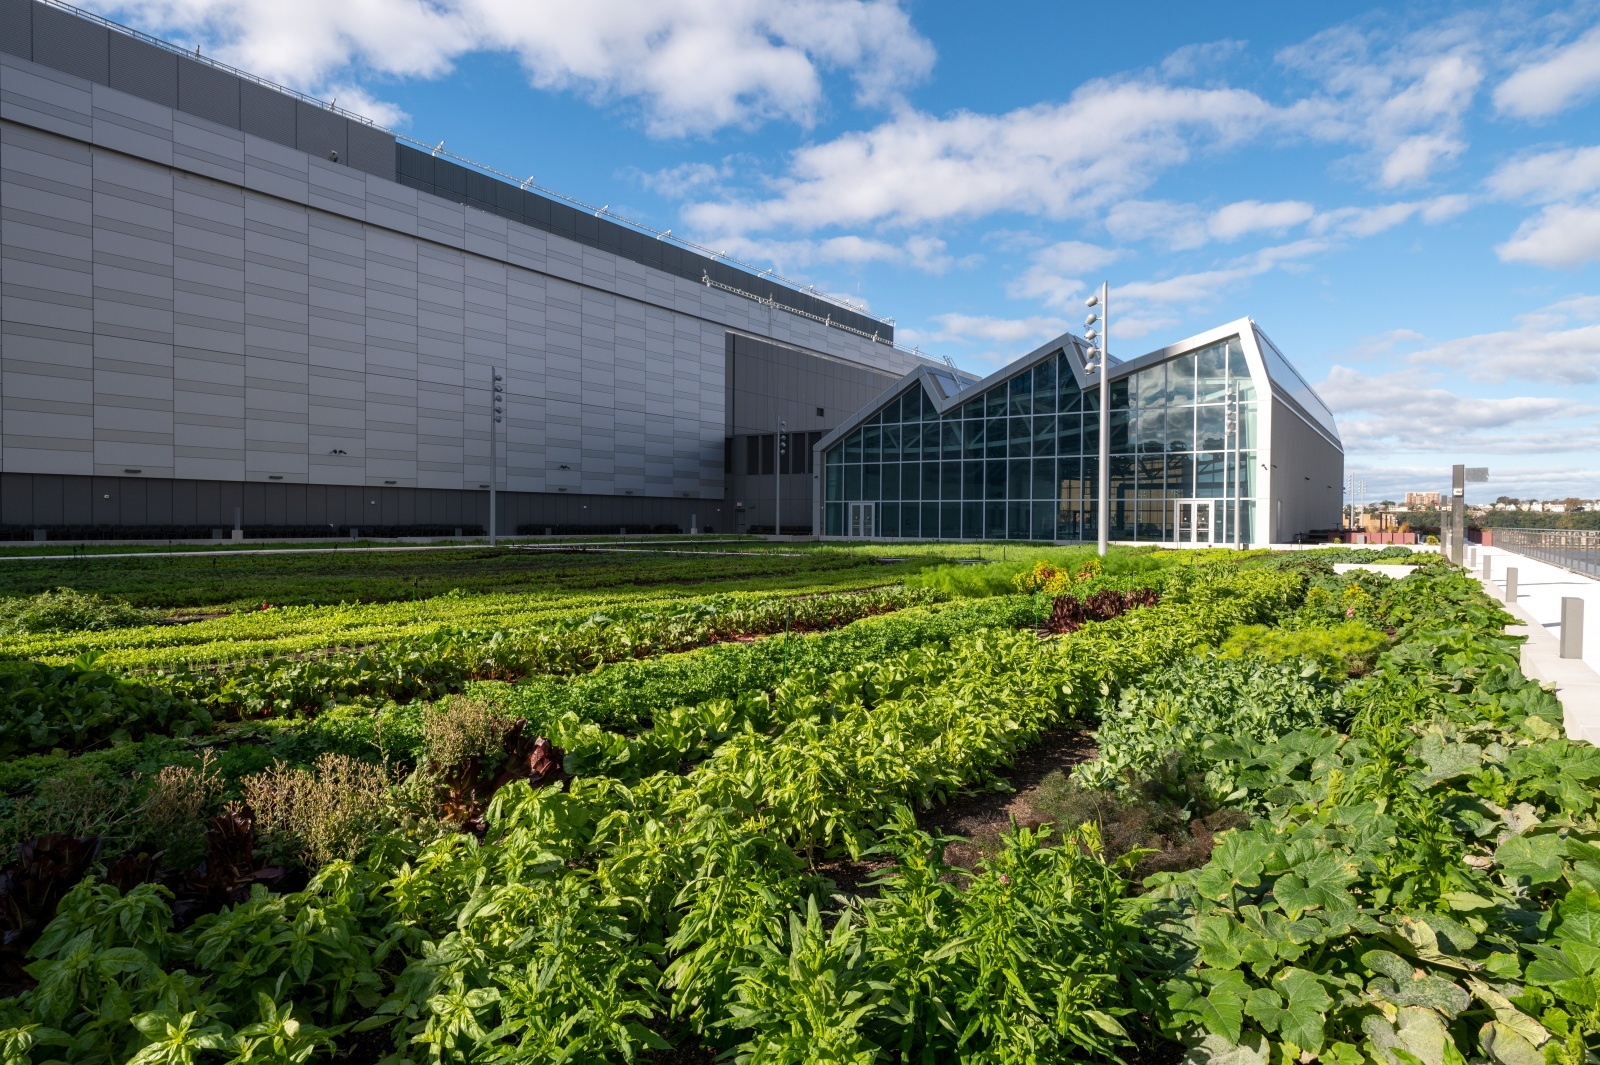 The newest section of the Javits Center’s green roof includes a farm and orchard, providing both locally grown produce and wildlife habitat. Photo: Javits Center